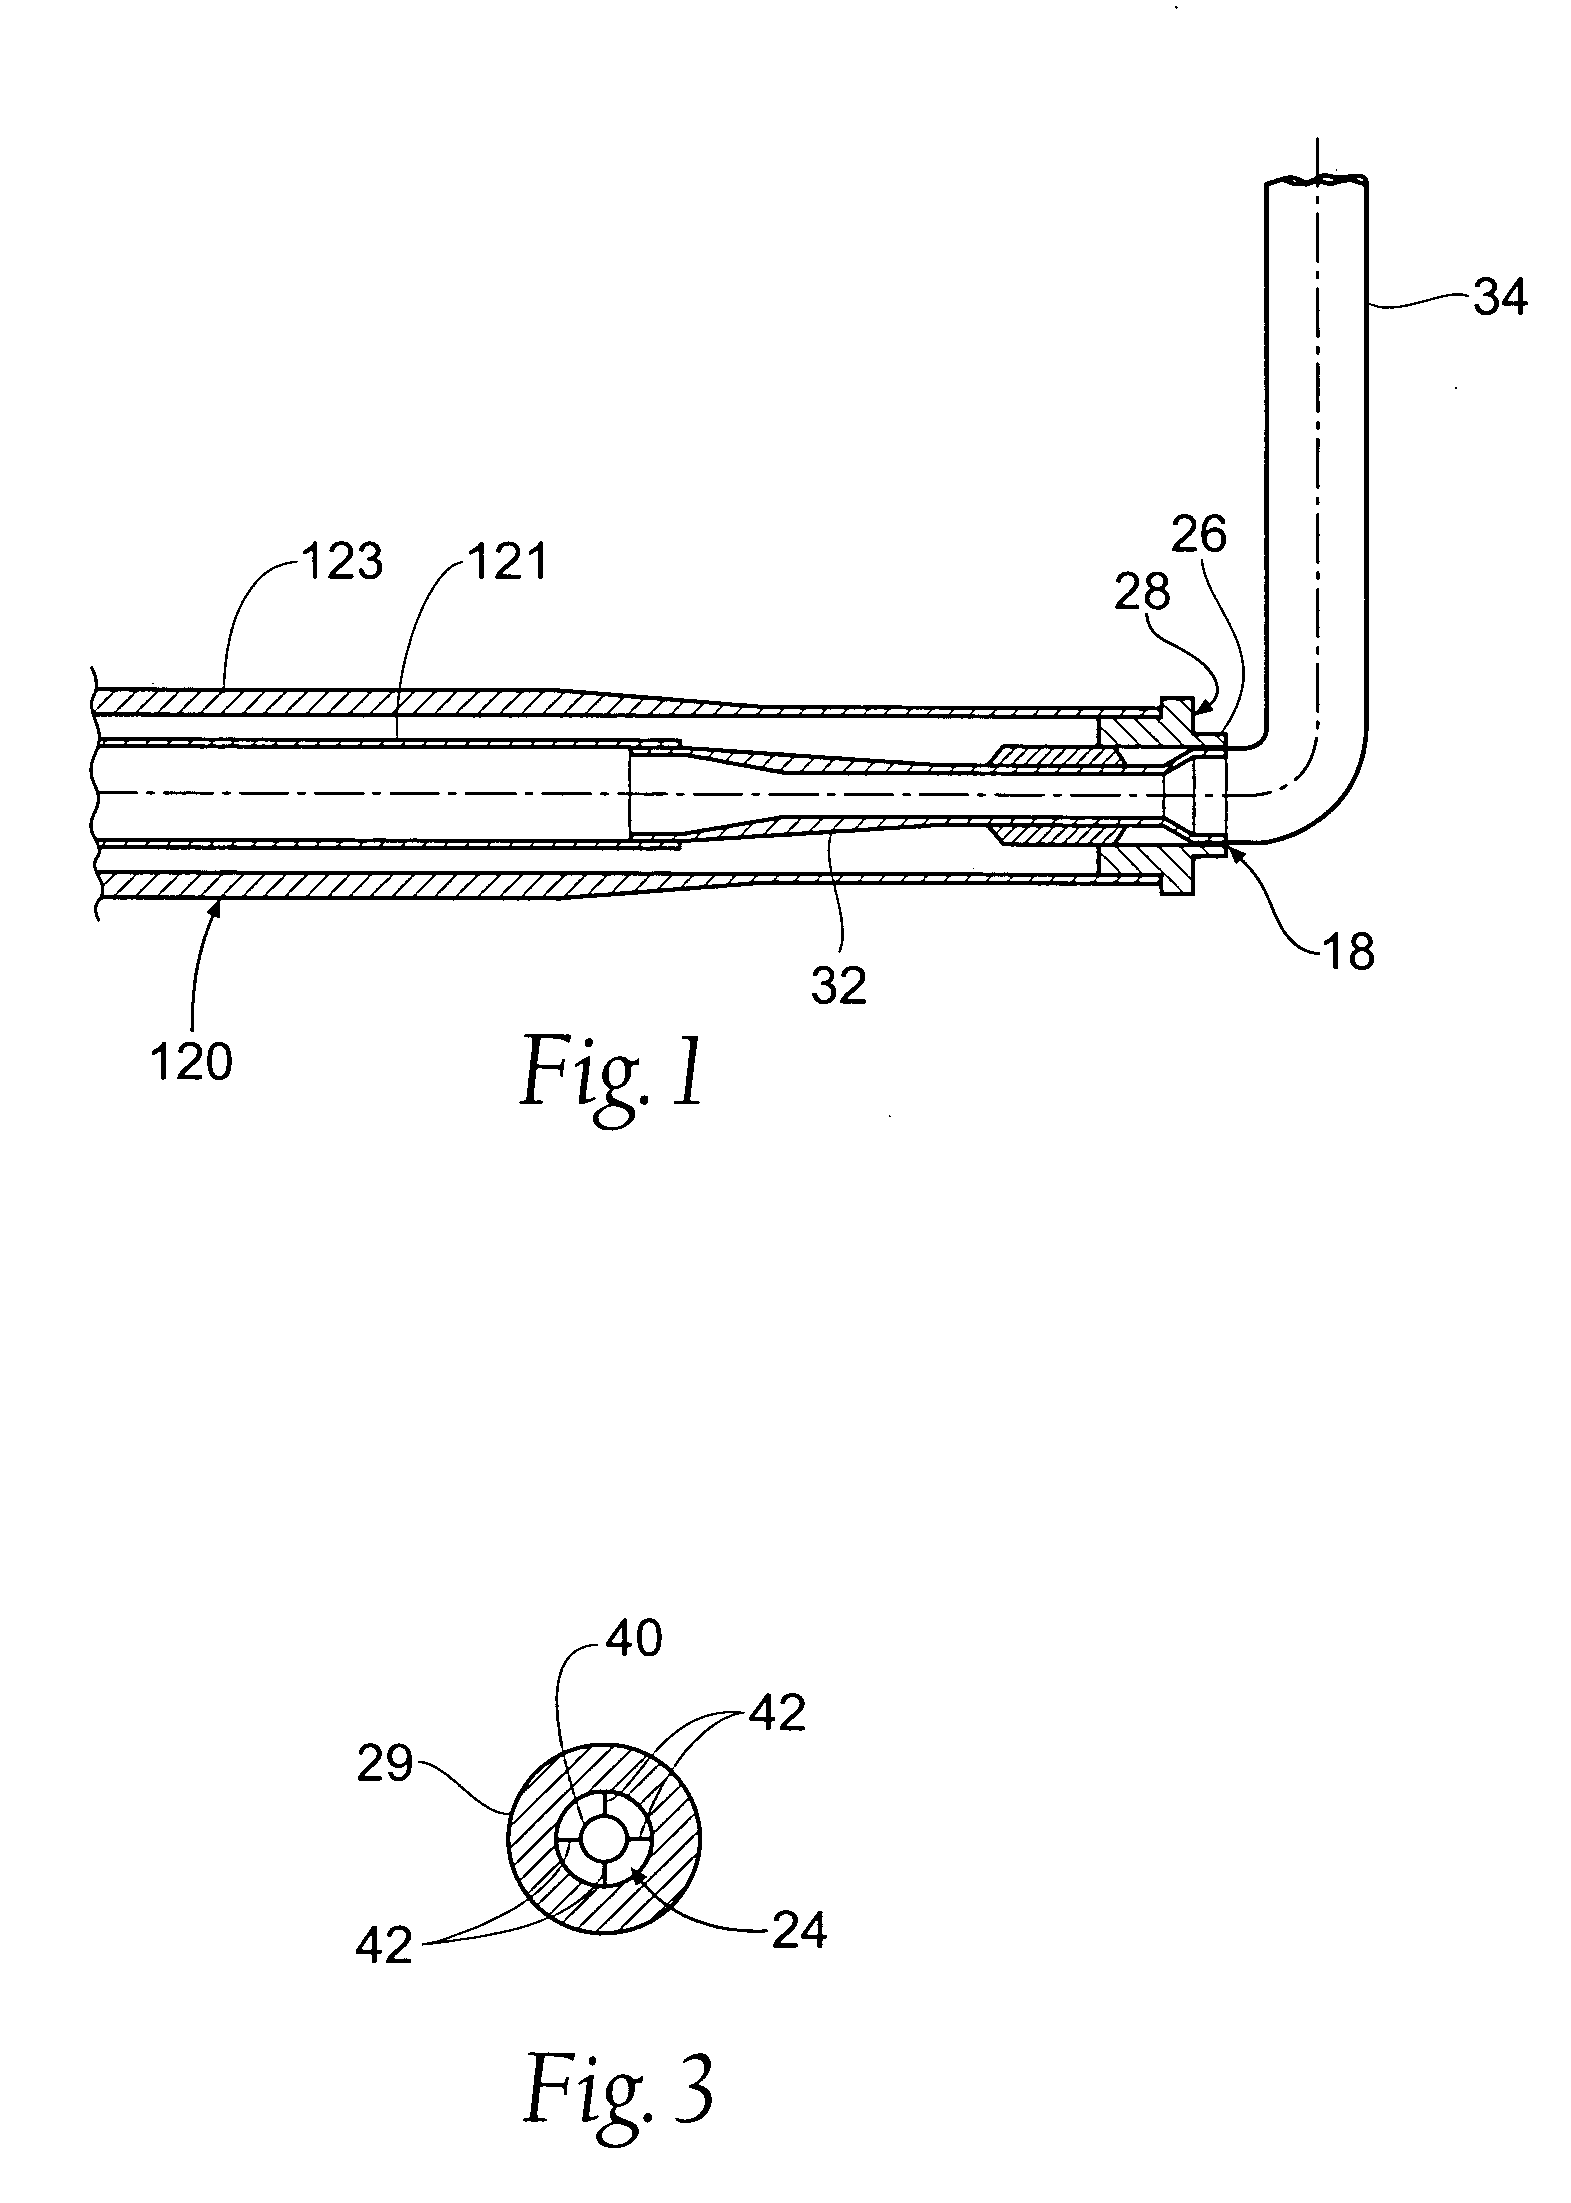 Apparatus and methods for entering cavities of the body